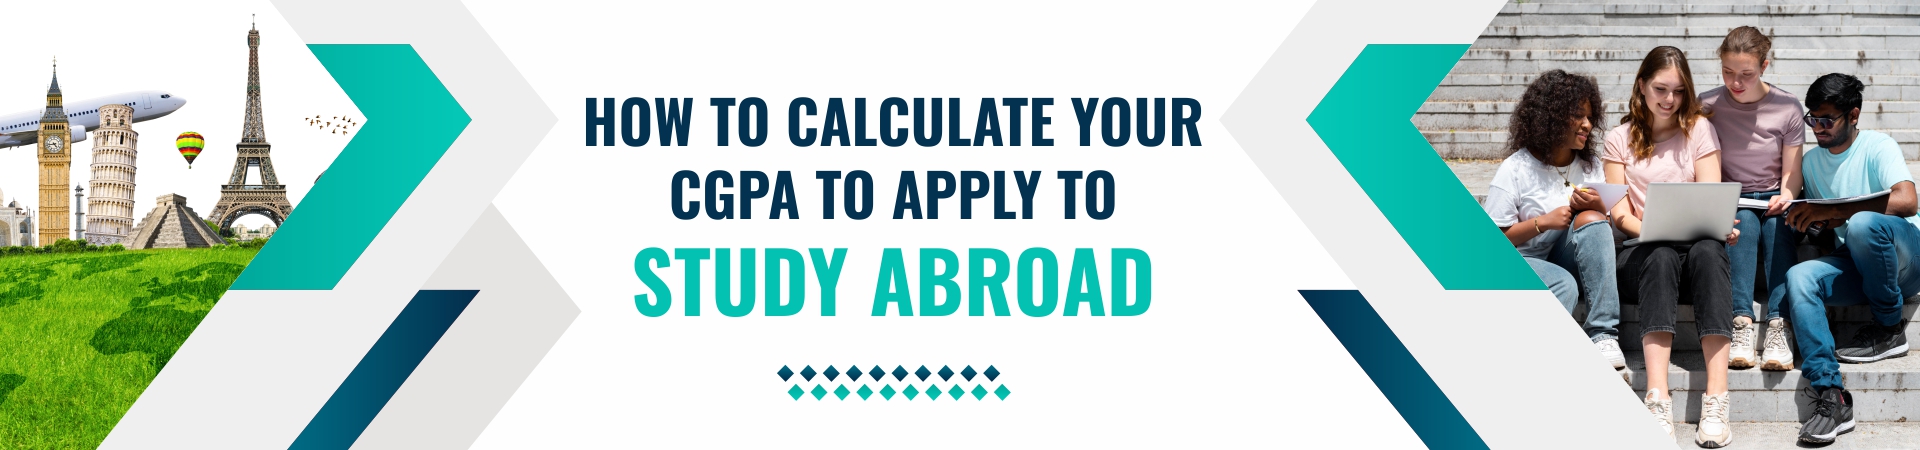 How to calculate CGPA to apply to study abroad